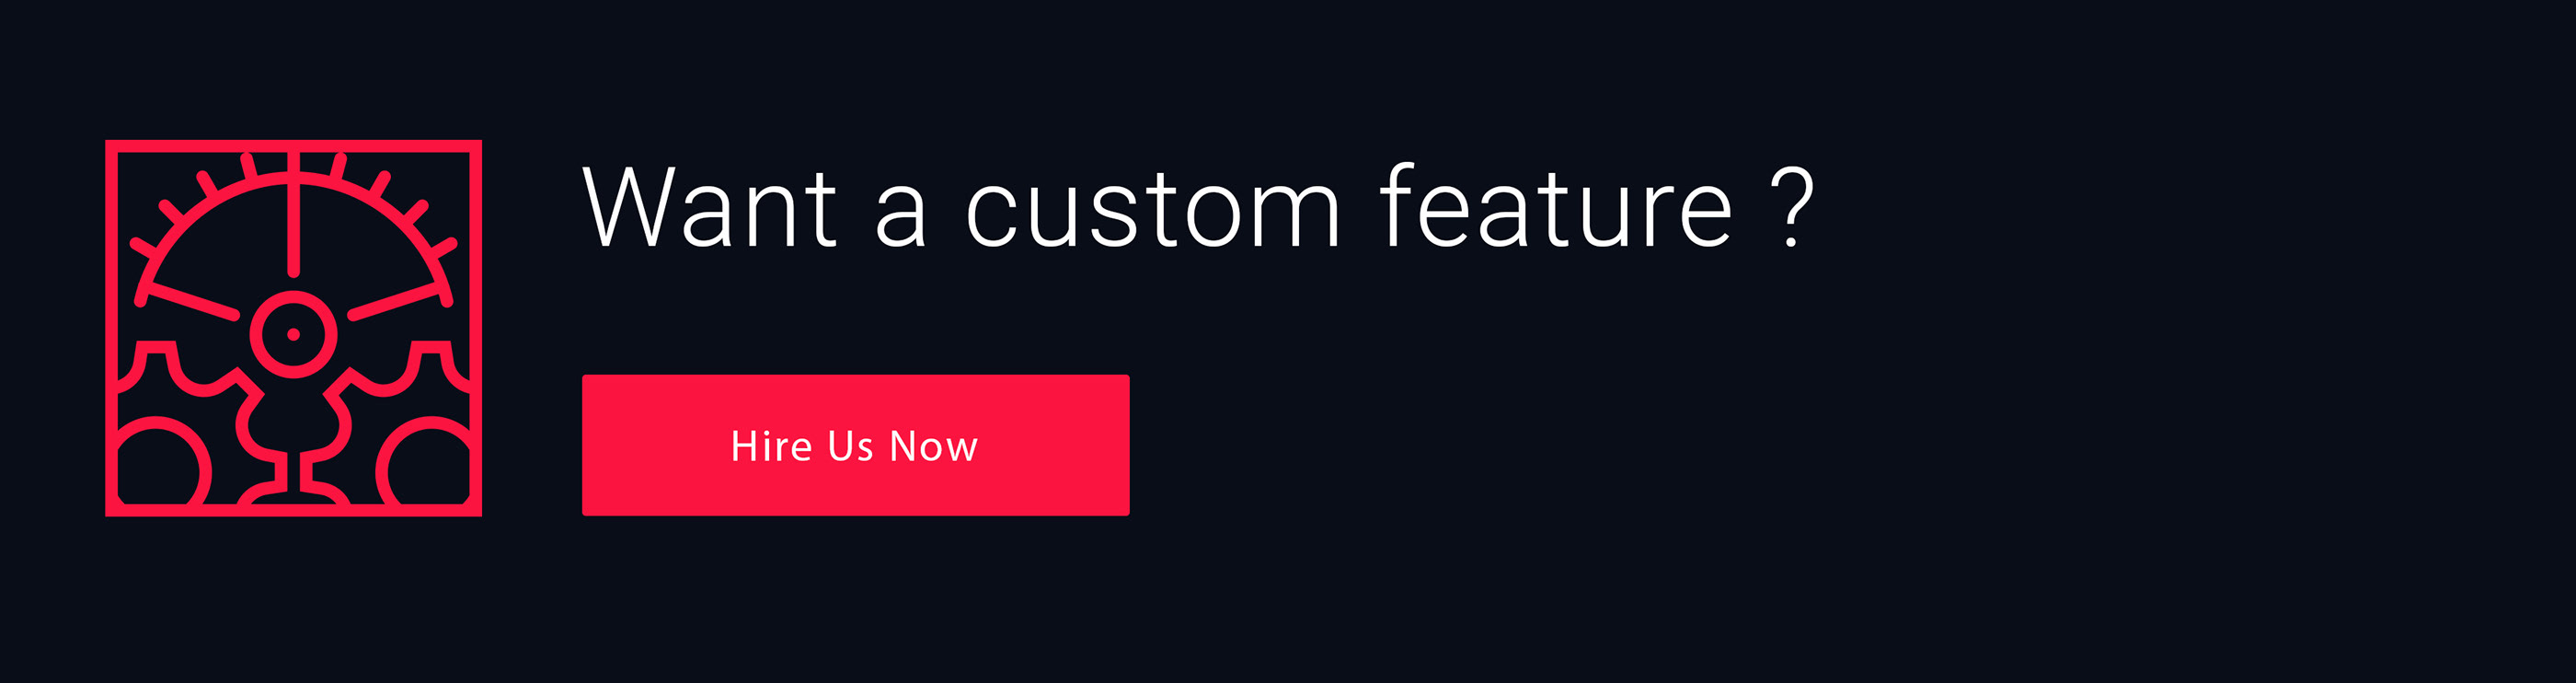 Dark blue banner with red icon, red button and white lettering "Want a custom feature?".